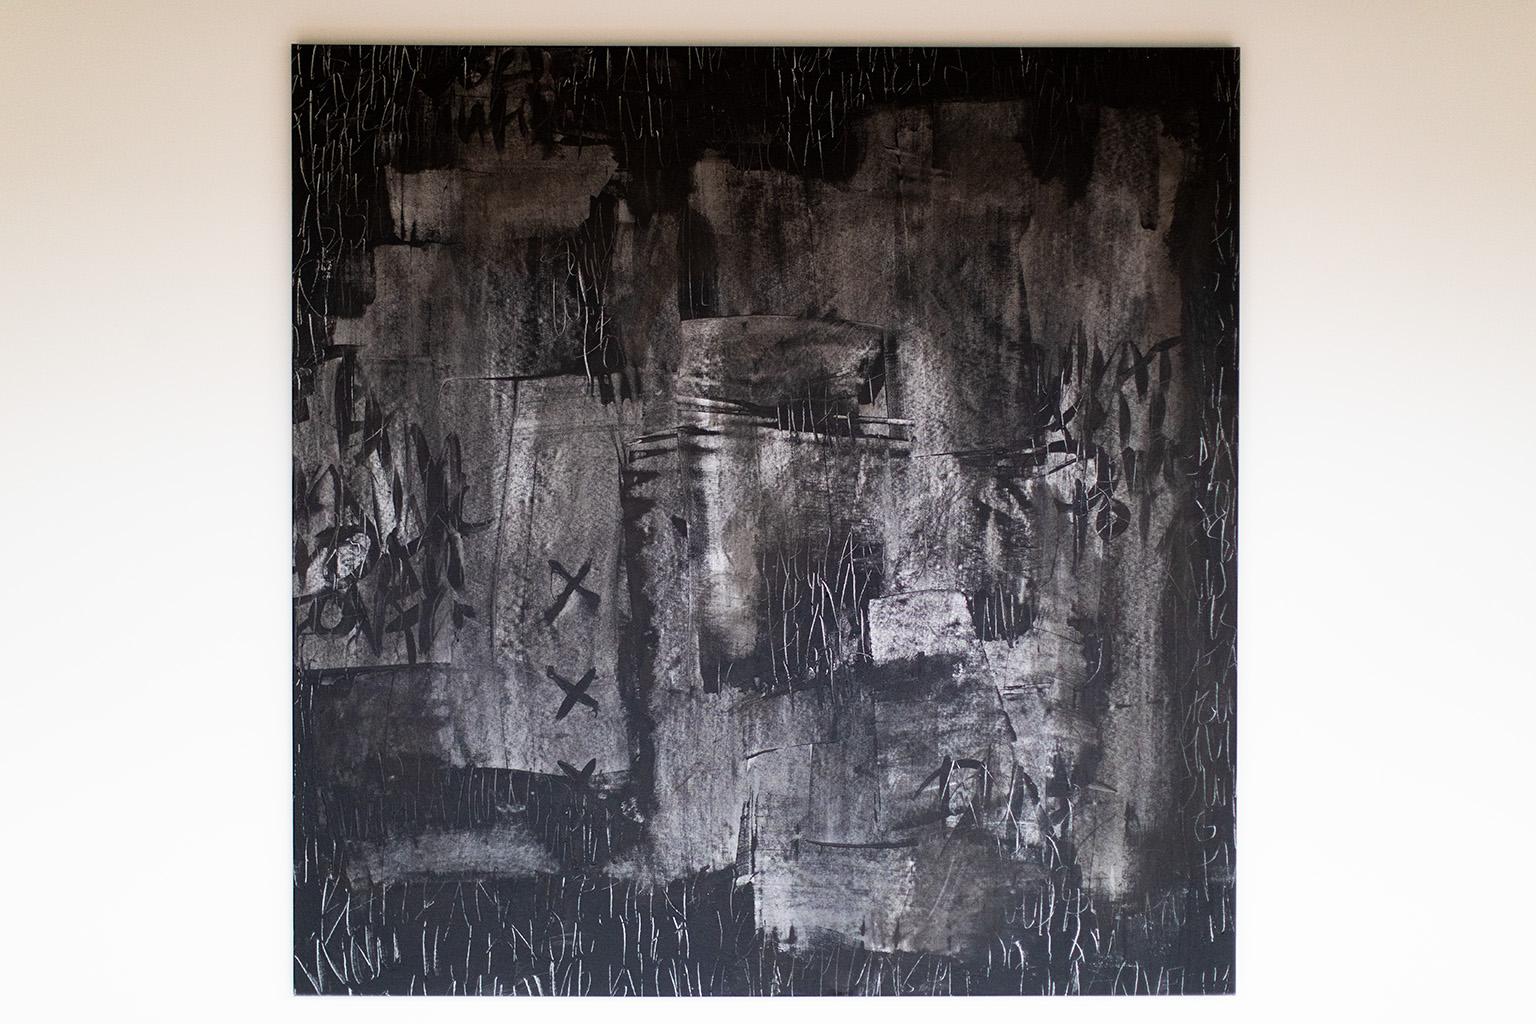 Black Contemporary Art, Abstract Art, Abstract Paintings-Roots Unturned

ABOUT THIS PIECE:
“Roots Unturned” is a piece of art inspired by Japan. Addison previously utilized text to create texture and depth in her painting and explored further into